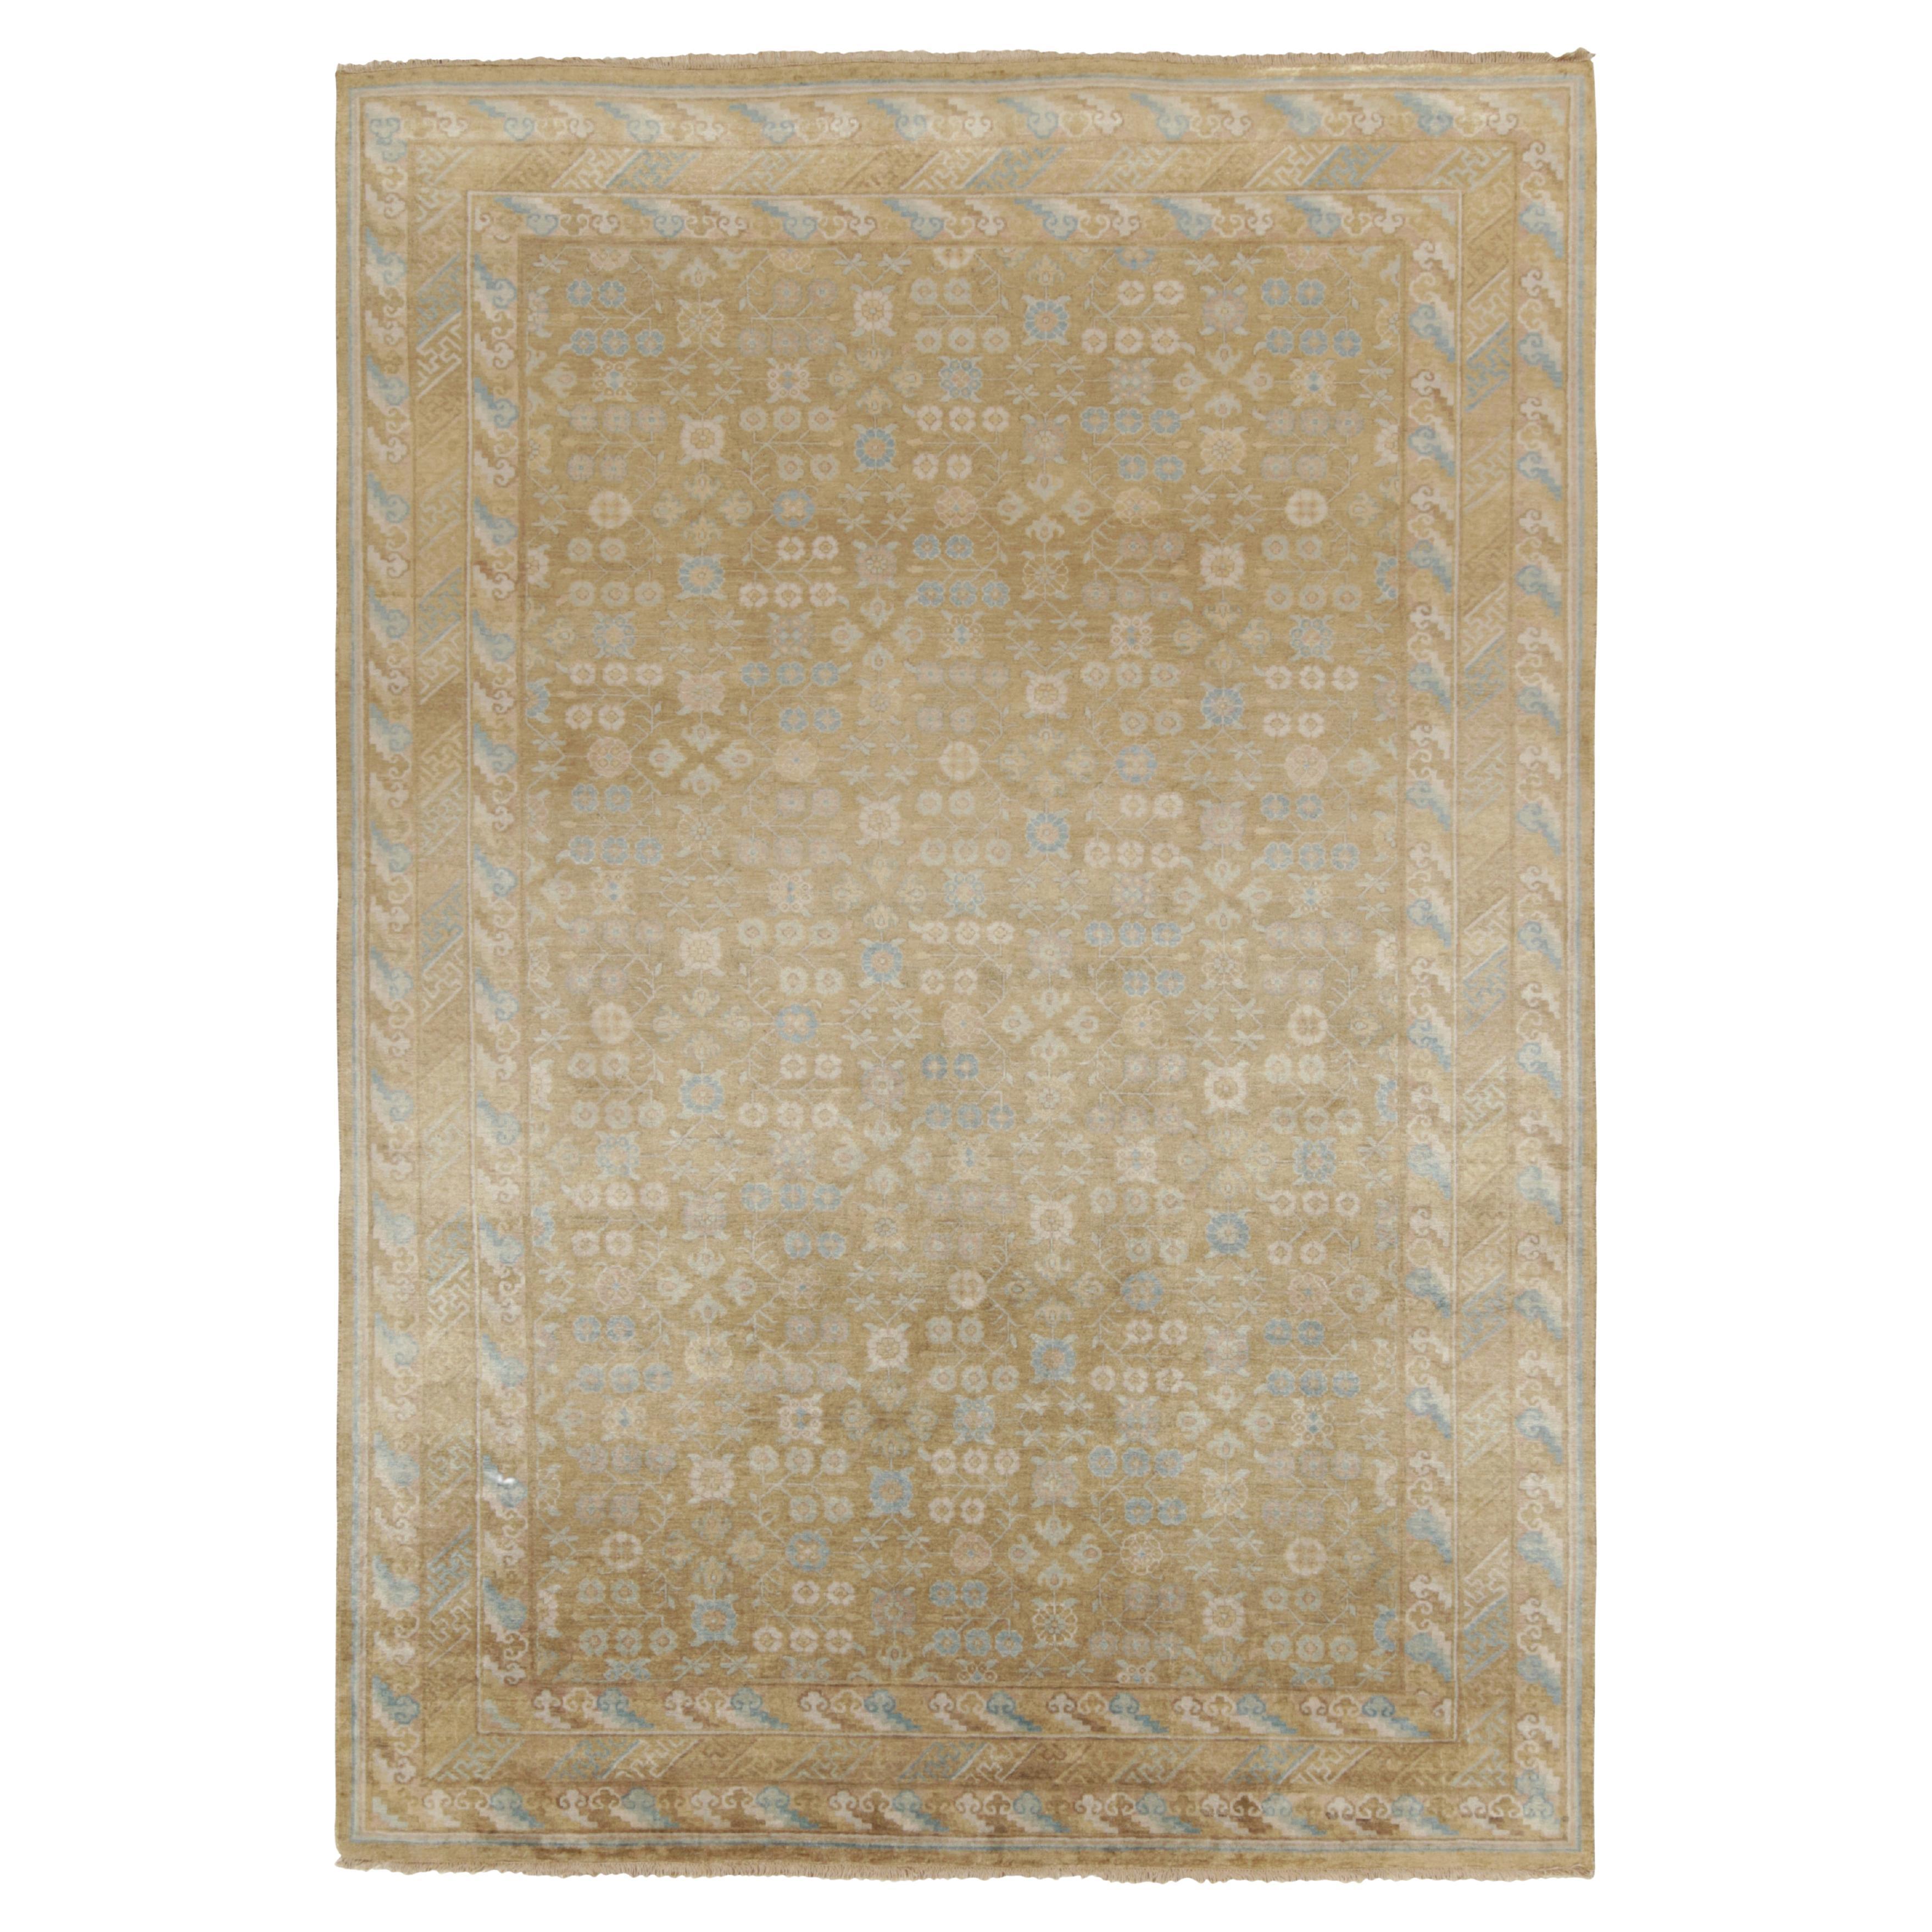 Rug & Kilim’s Khotan style rug in Gold, Beige-Brown and Blue Patterns For Sale